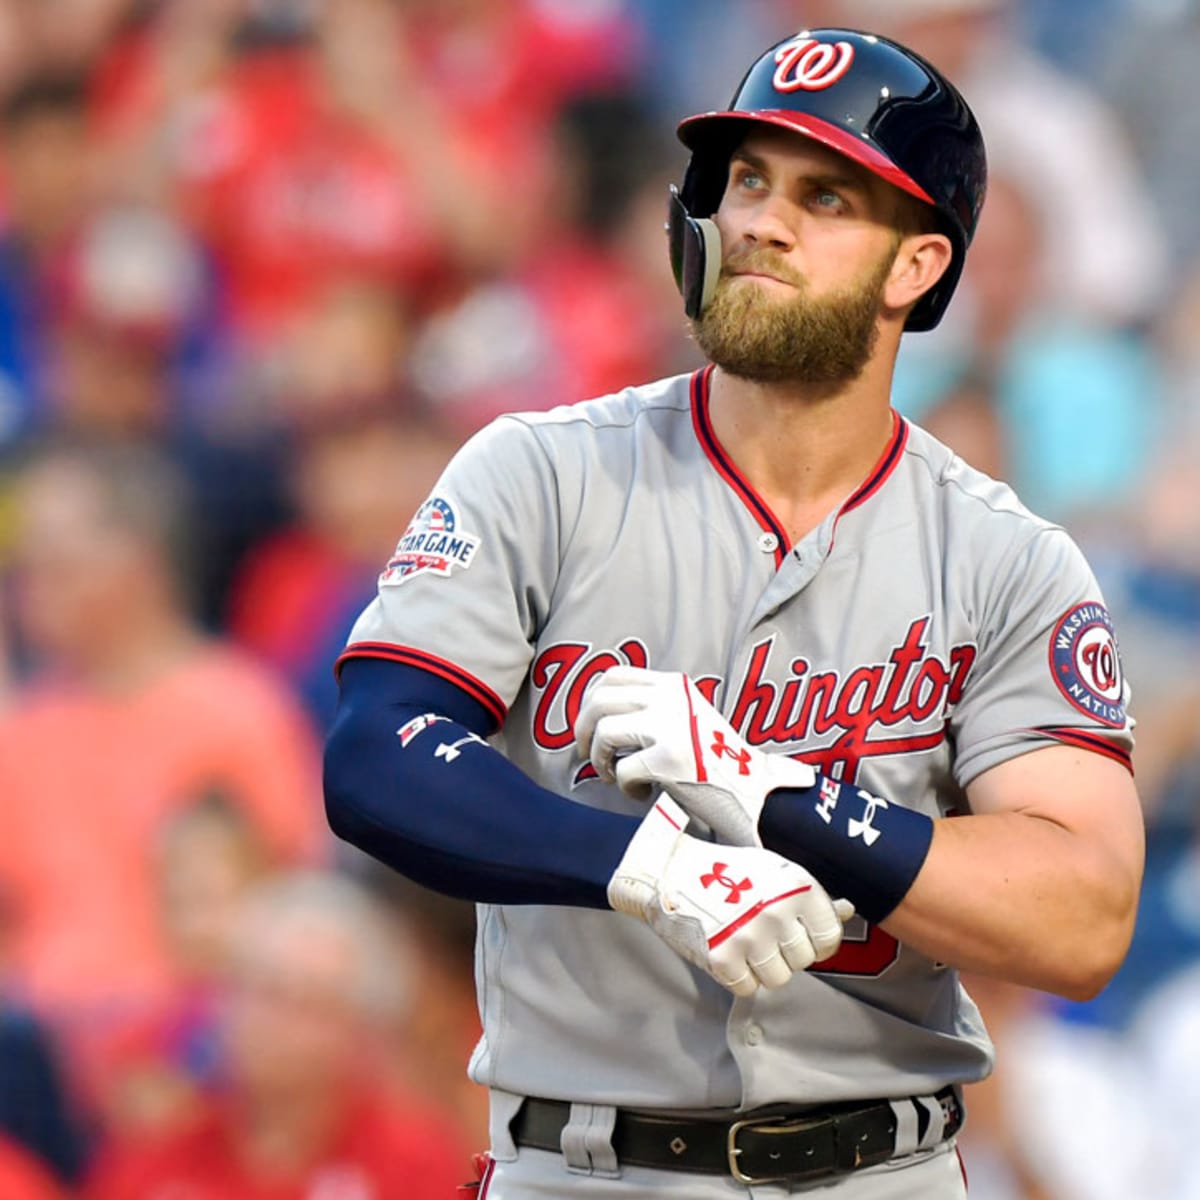 Bryce Harper cost the Nationals a lot of money after Home Run Derby  promotion backfires